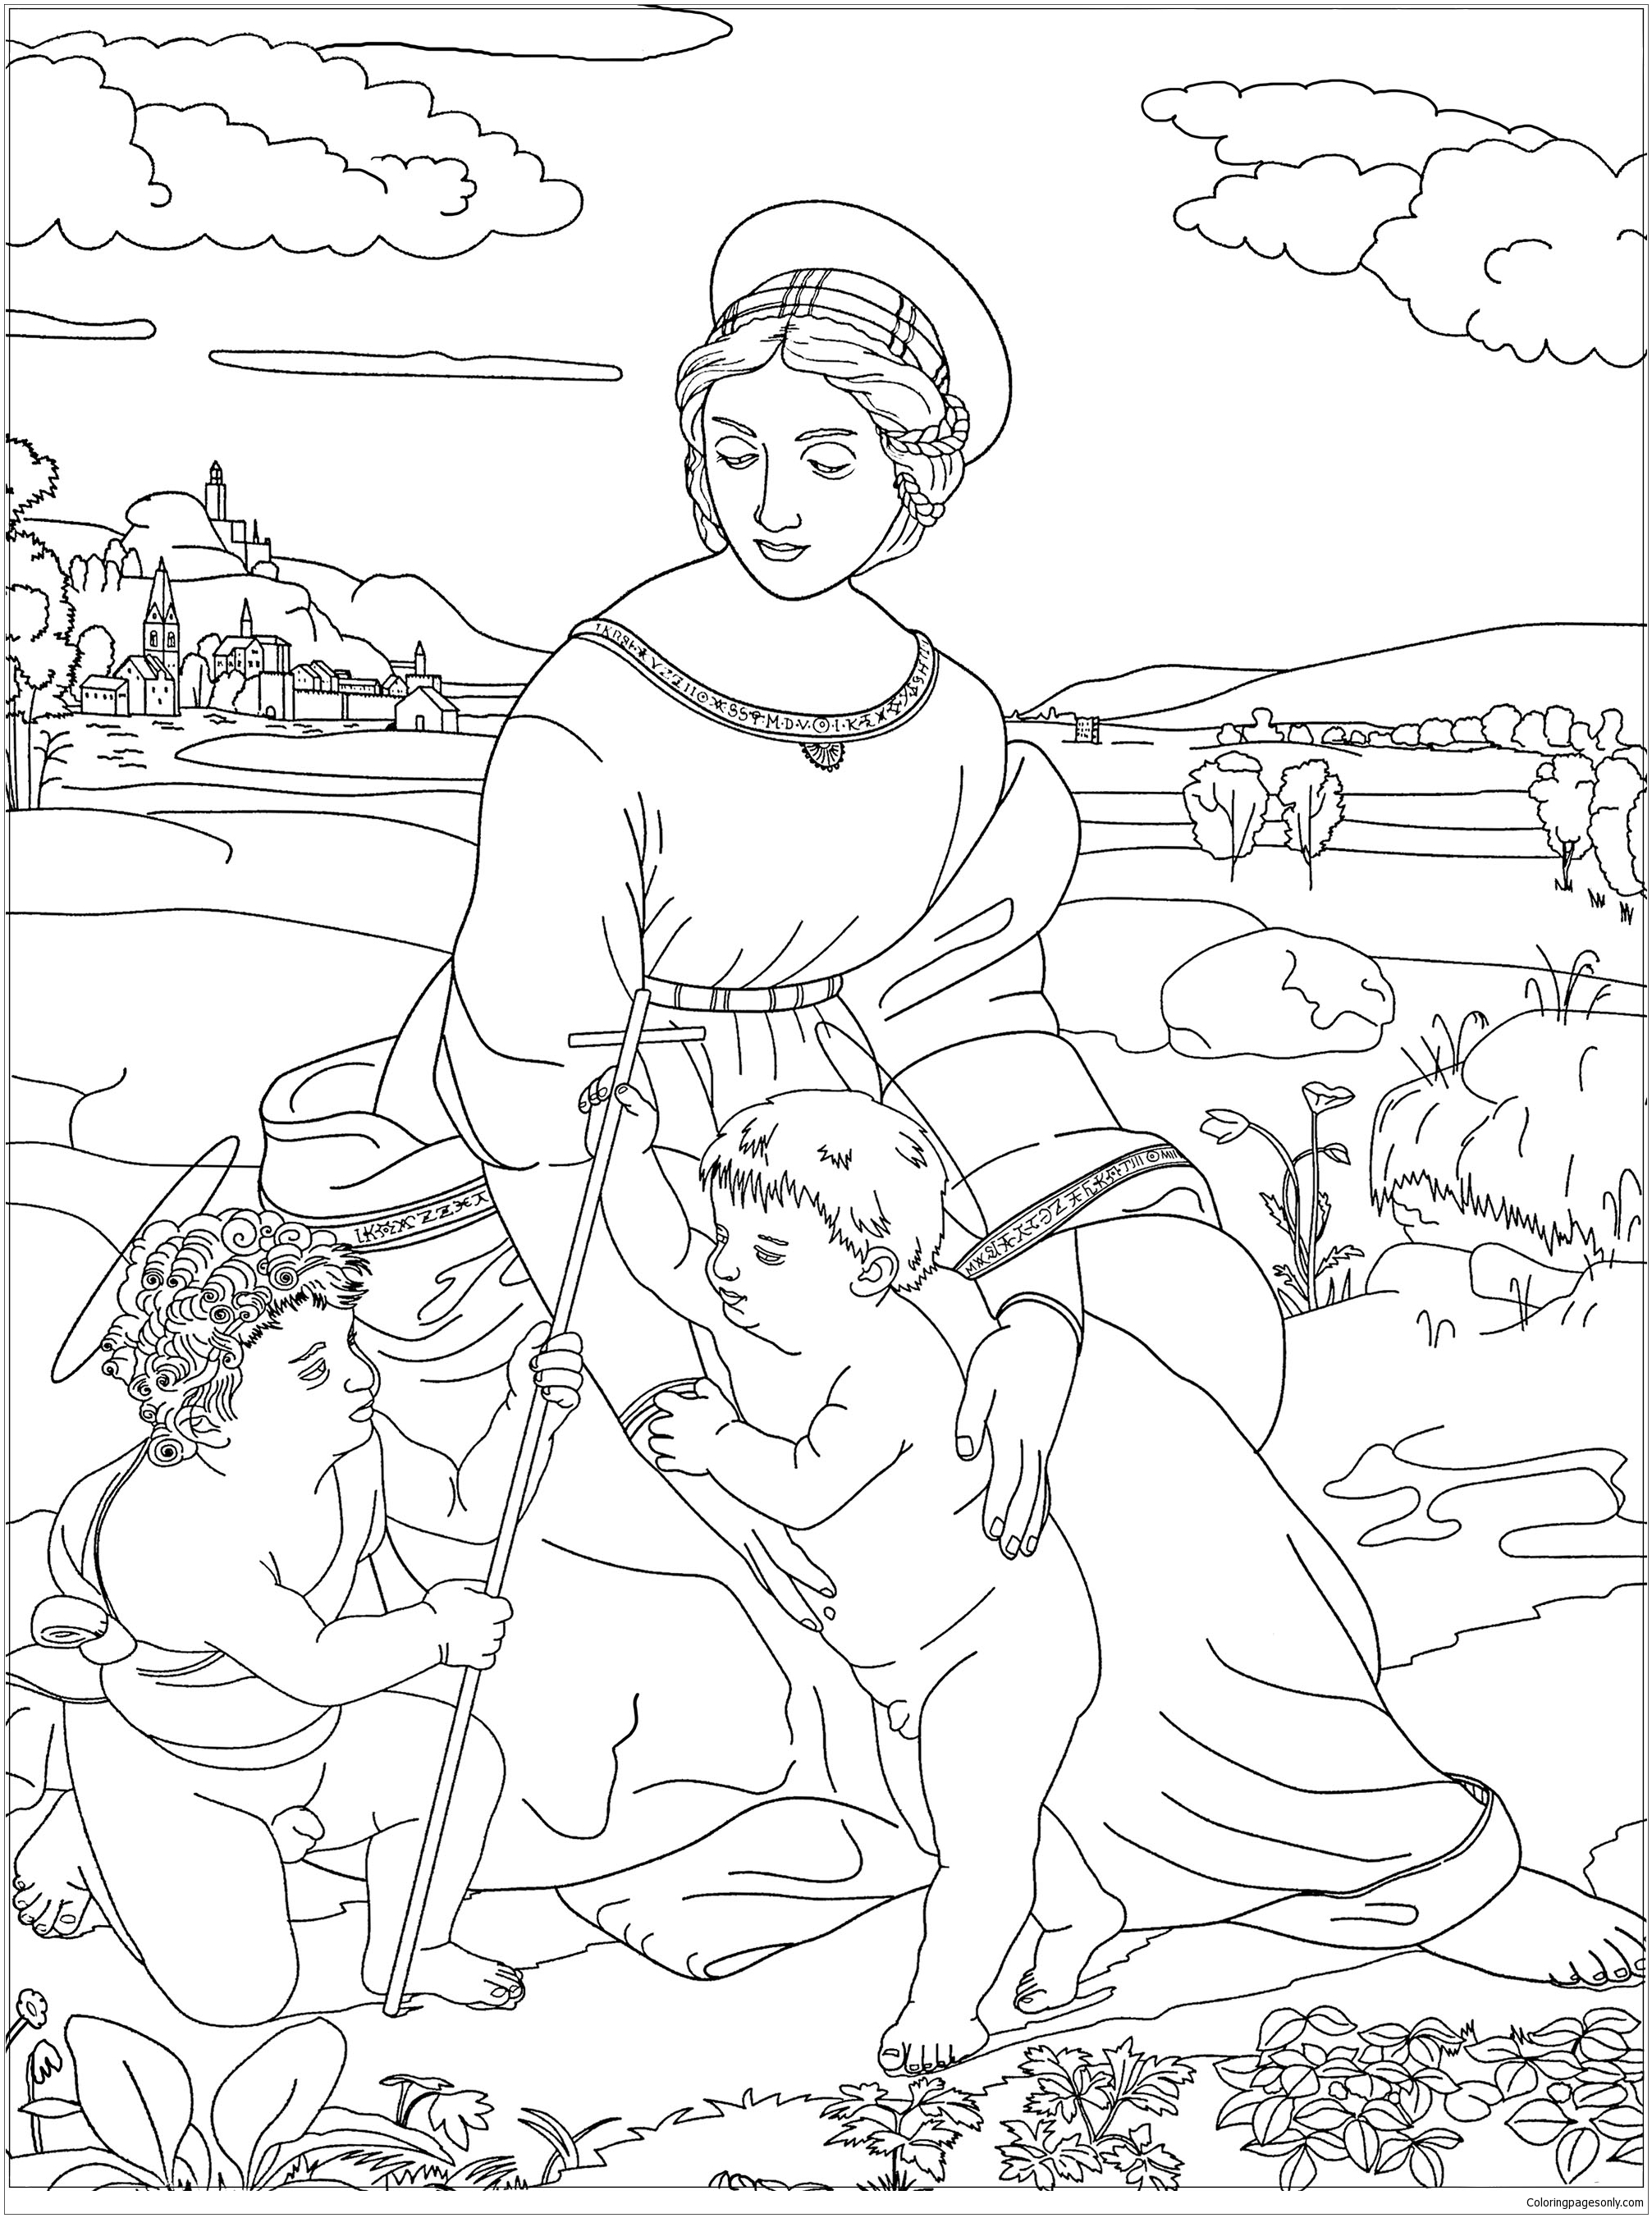 Raphael Madonna of the Meadow Coloring Pages - Arts & Culture Coloring Pages  - Free Printable Coloring Pages Online